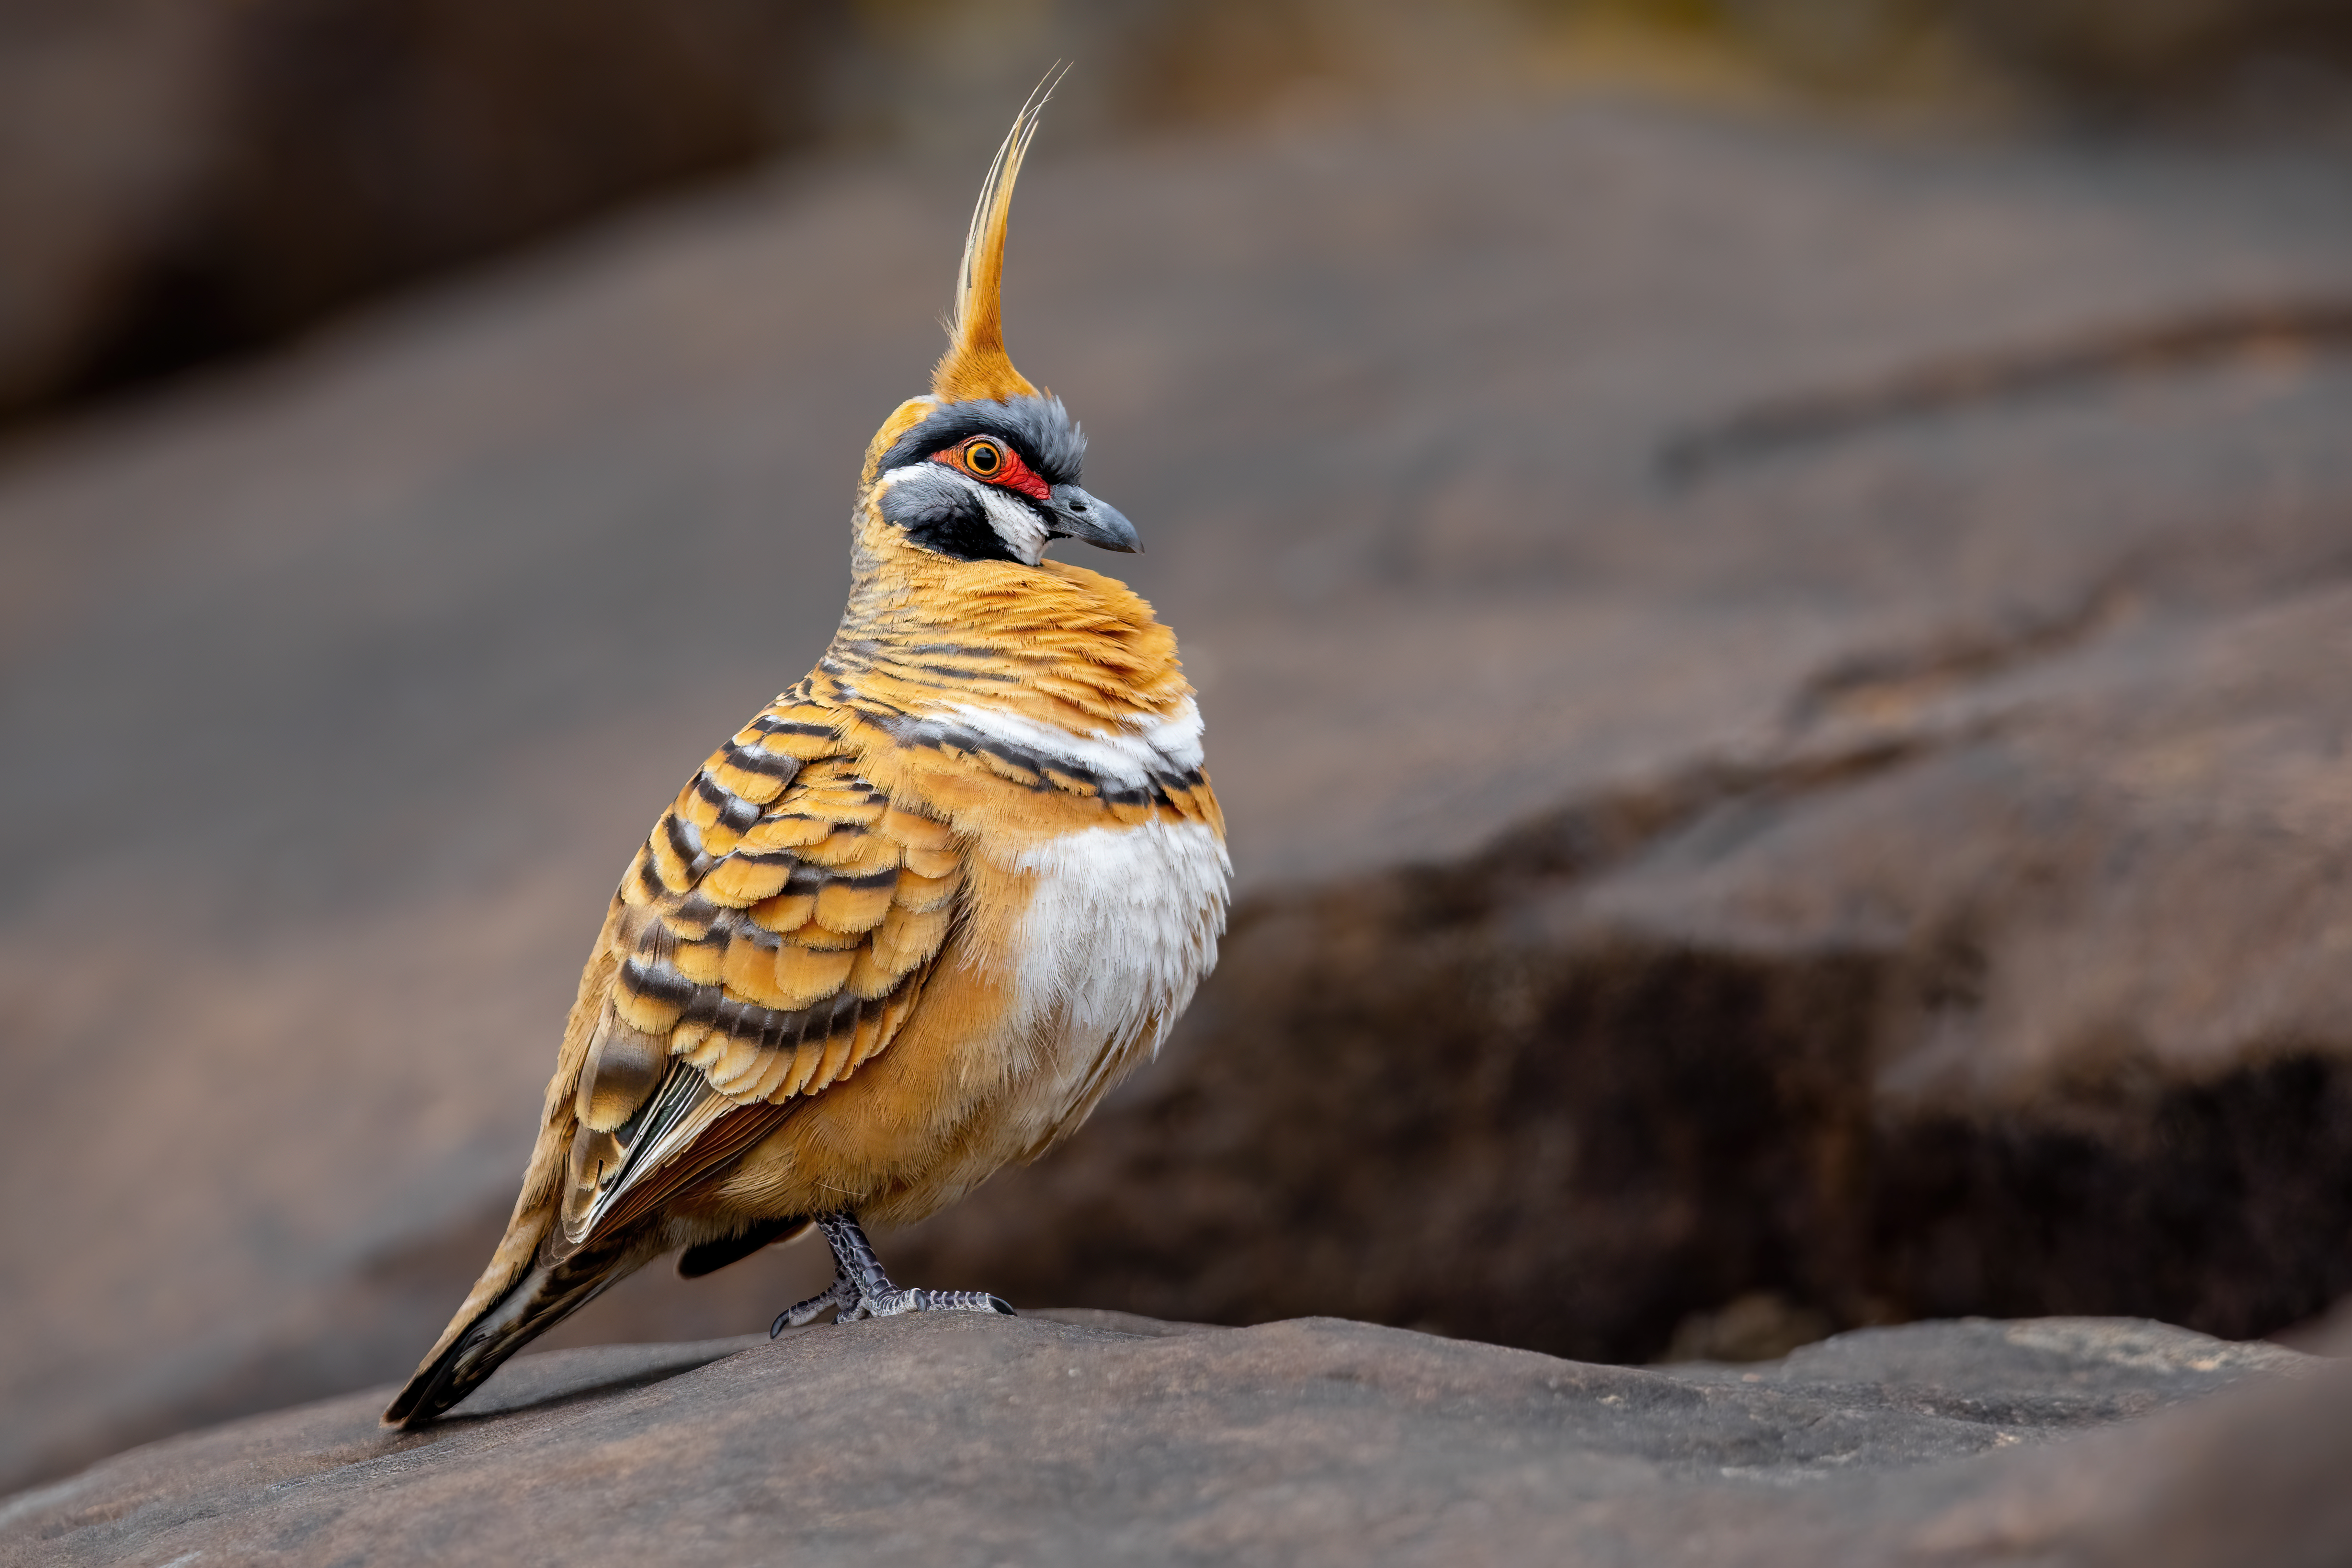 Spinifex pigeon (Geophaps plumifera), also known as the Plumed pigeon or Gannaway pigeon by JJ Harrison